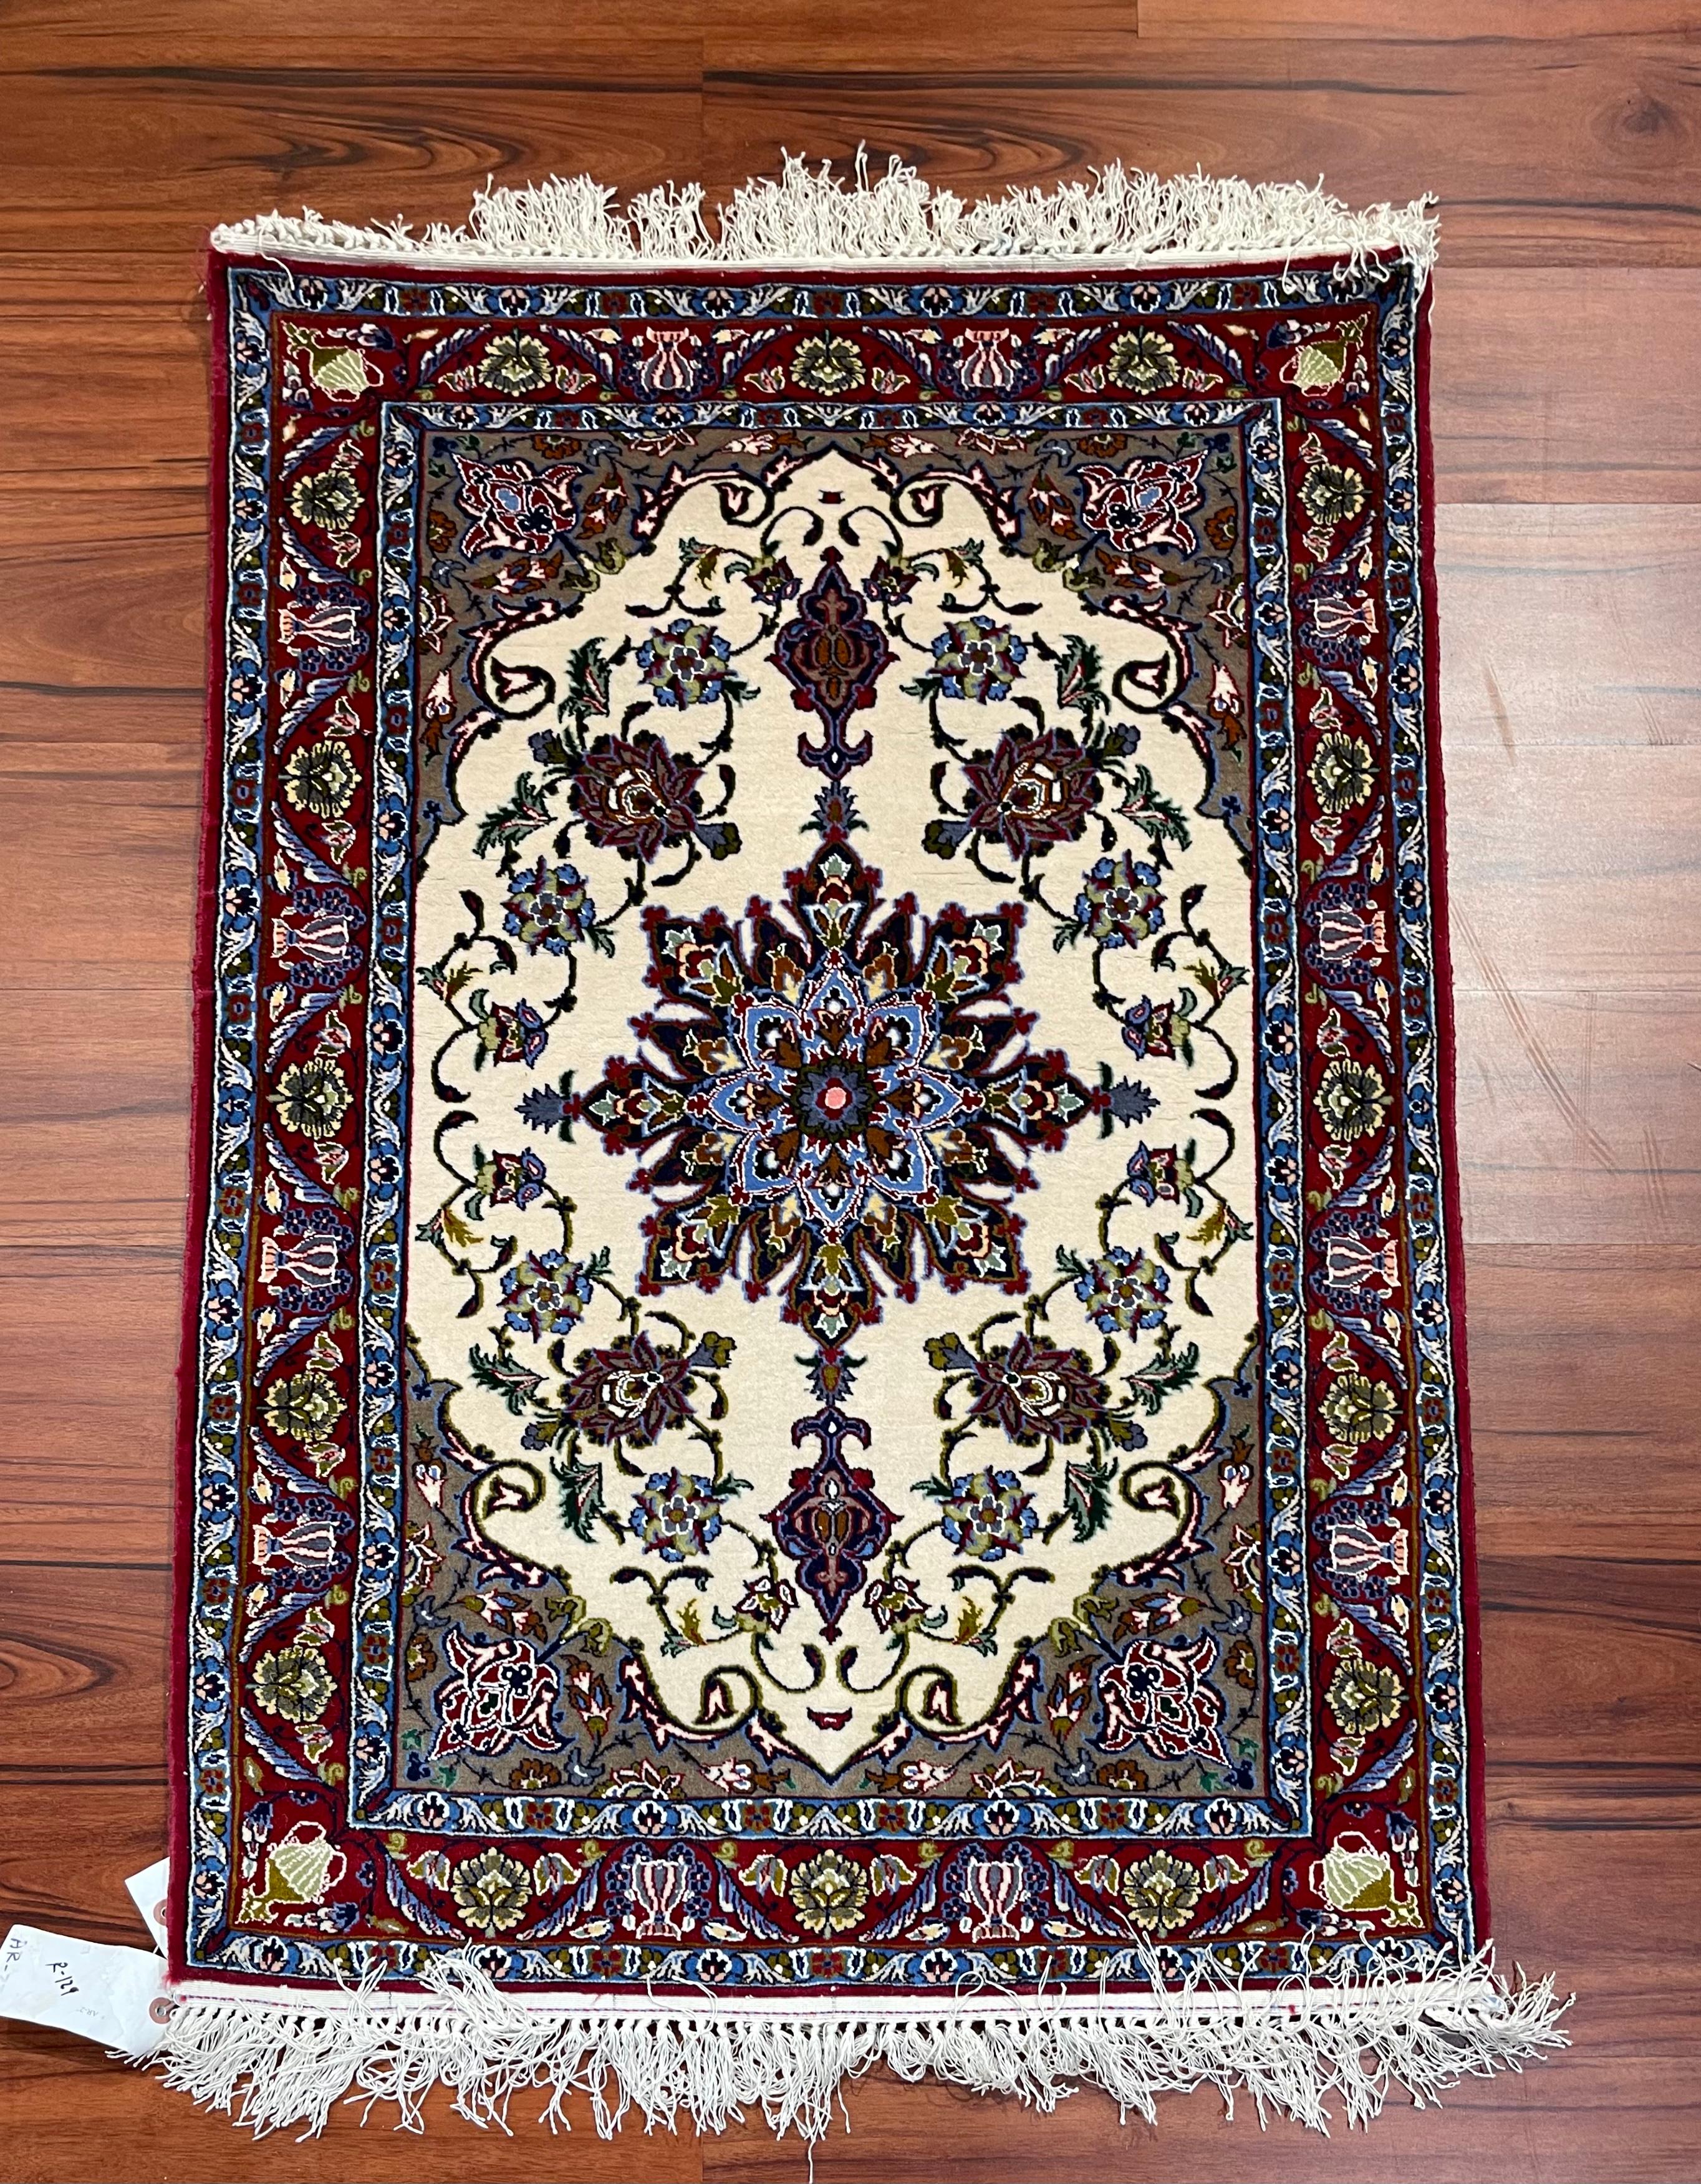 A stunning Persian Isfahan Rug originated from Iran. This hand-knotted piece is made from wool and silk and is in excellent condition. The dimensions are 2’3ft in width and 3’6ft in length.